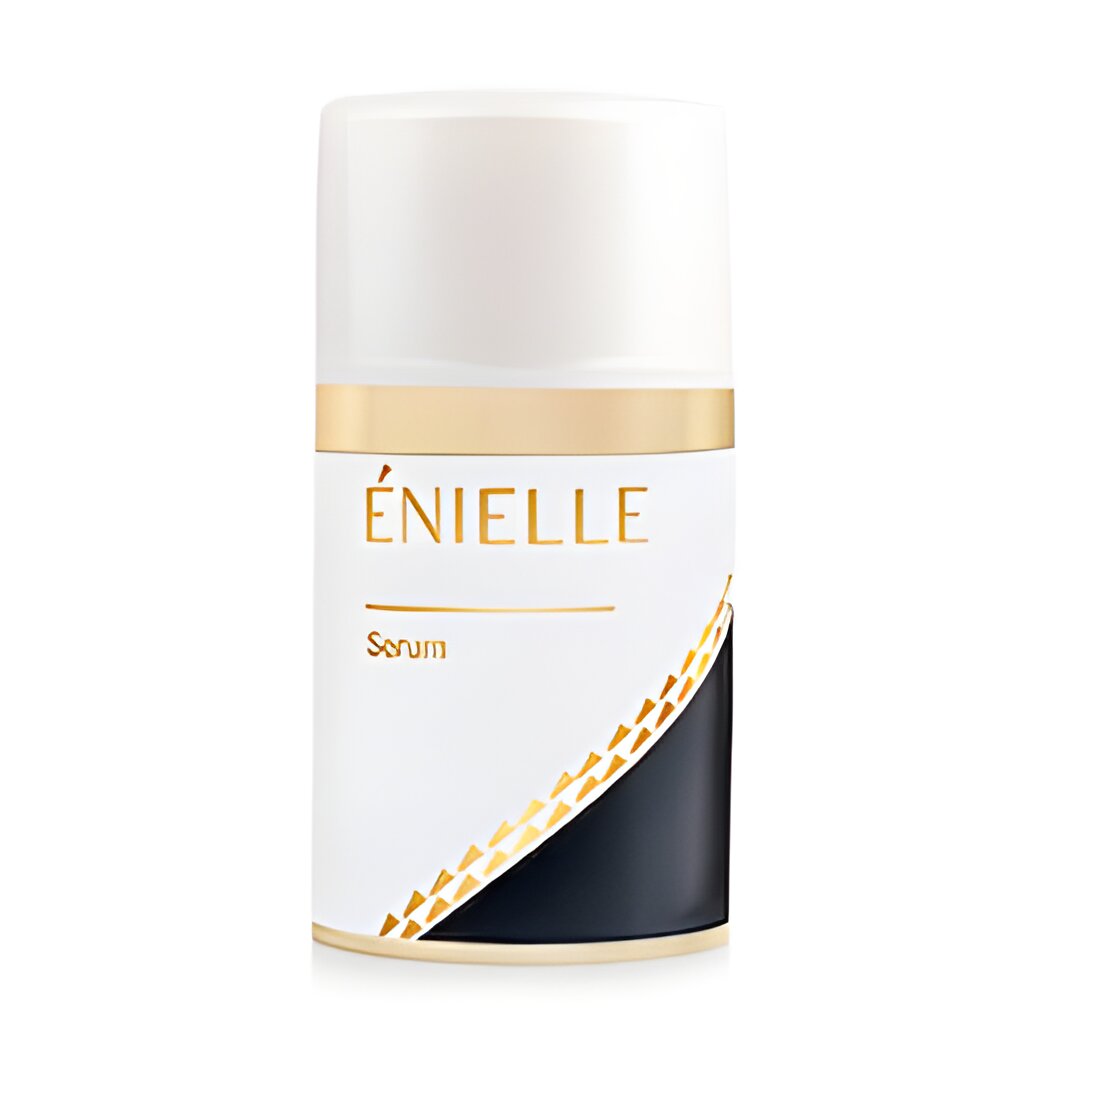 Free Ã©Nielle Serum Samples For Testers